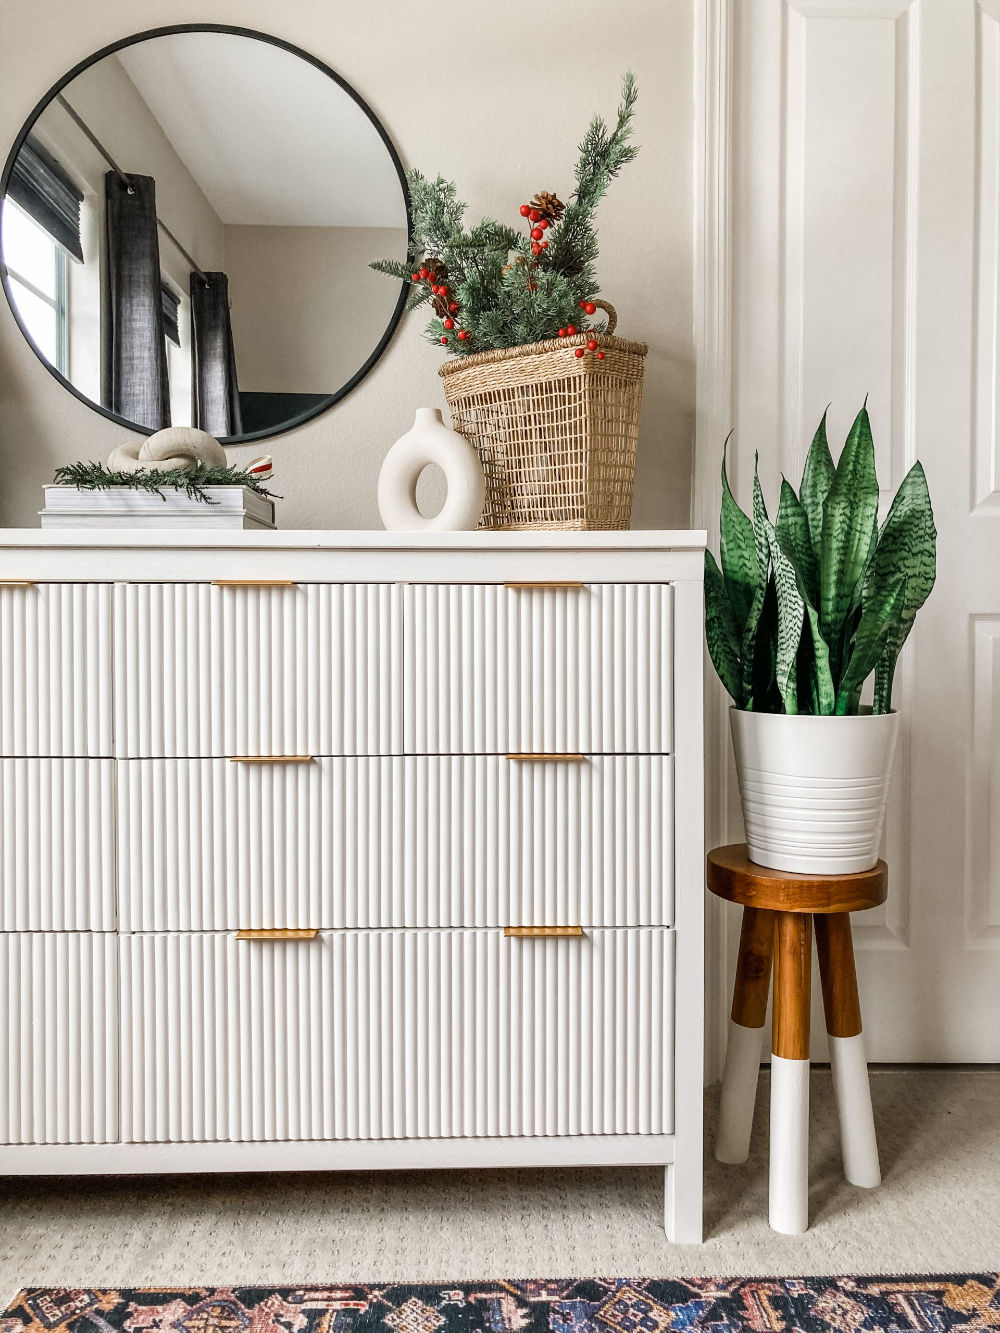 The Best Hemnes Dresser: A Stylish and Functional Storage Solution